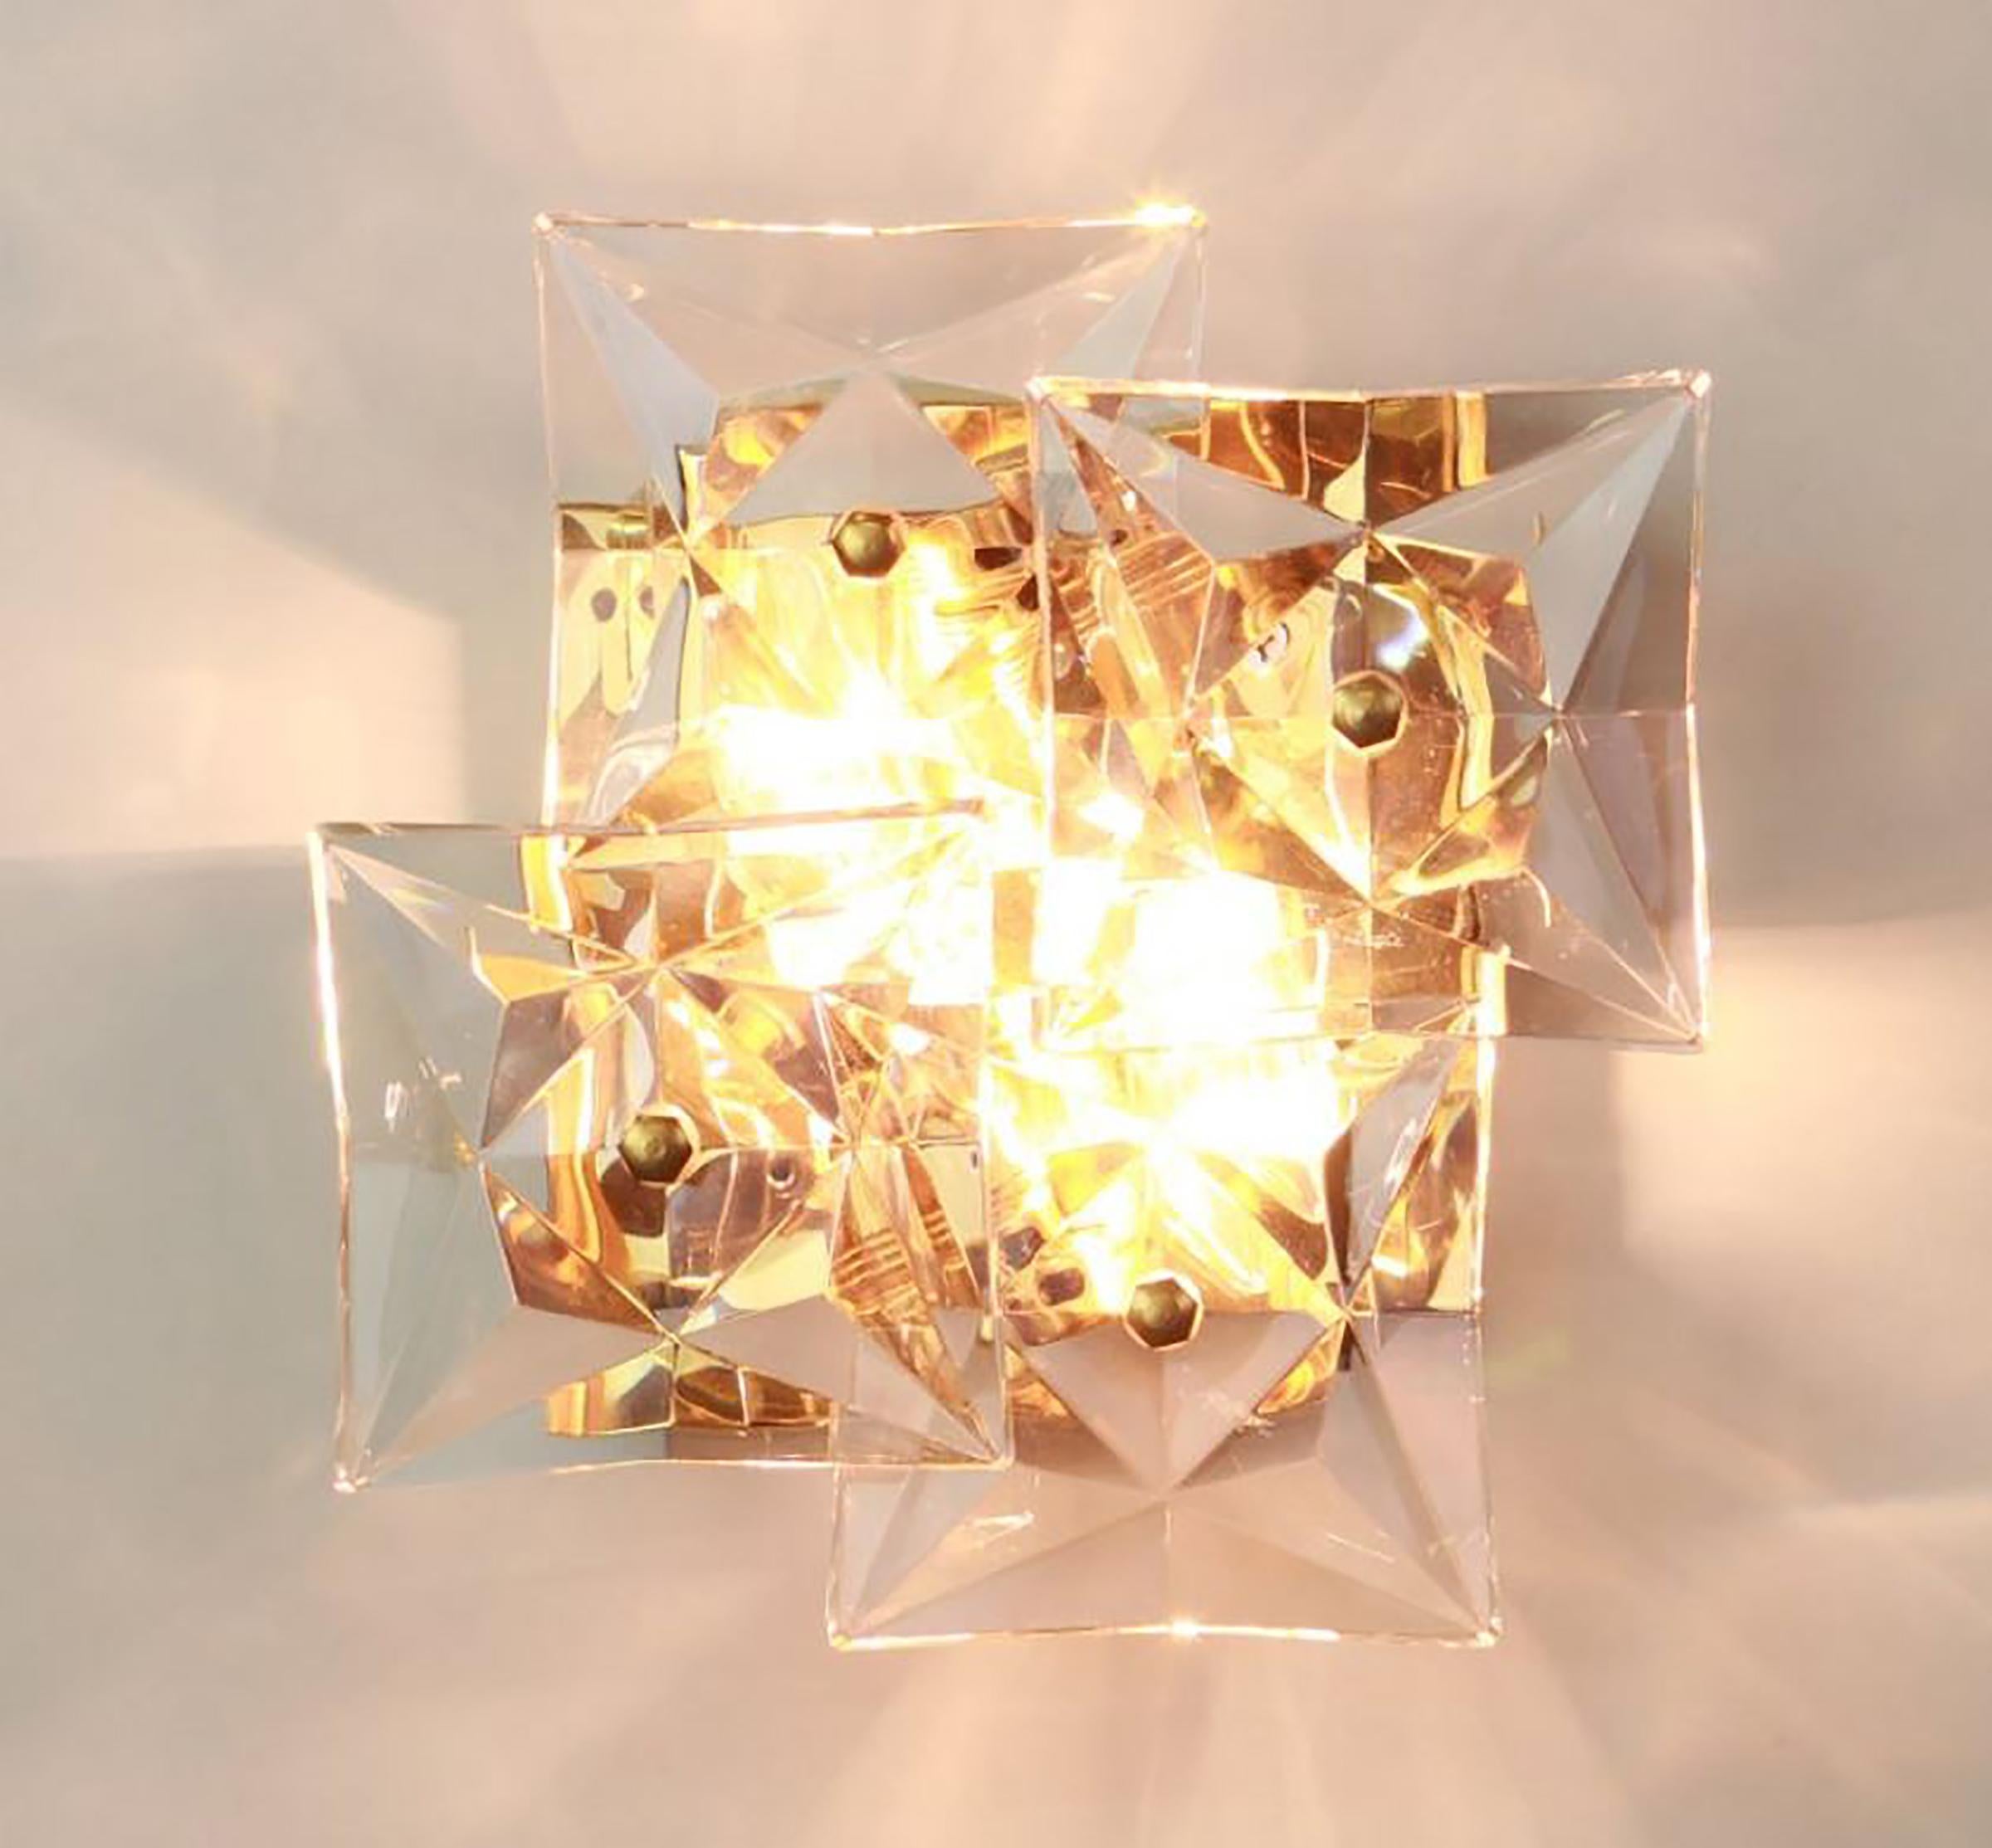 Metal One of the Ten Square Crystal, Gold-Plated, Sconces by Kinkeldey, Germany, 1970s For Sale